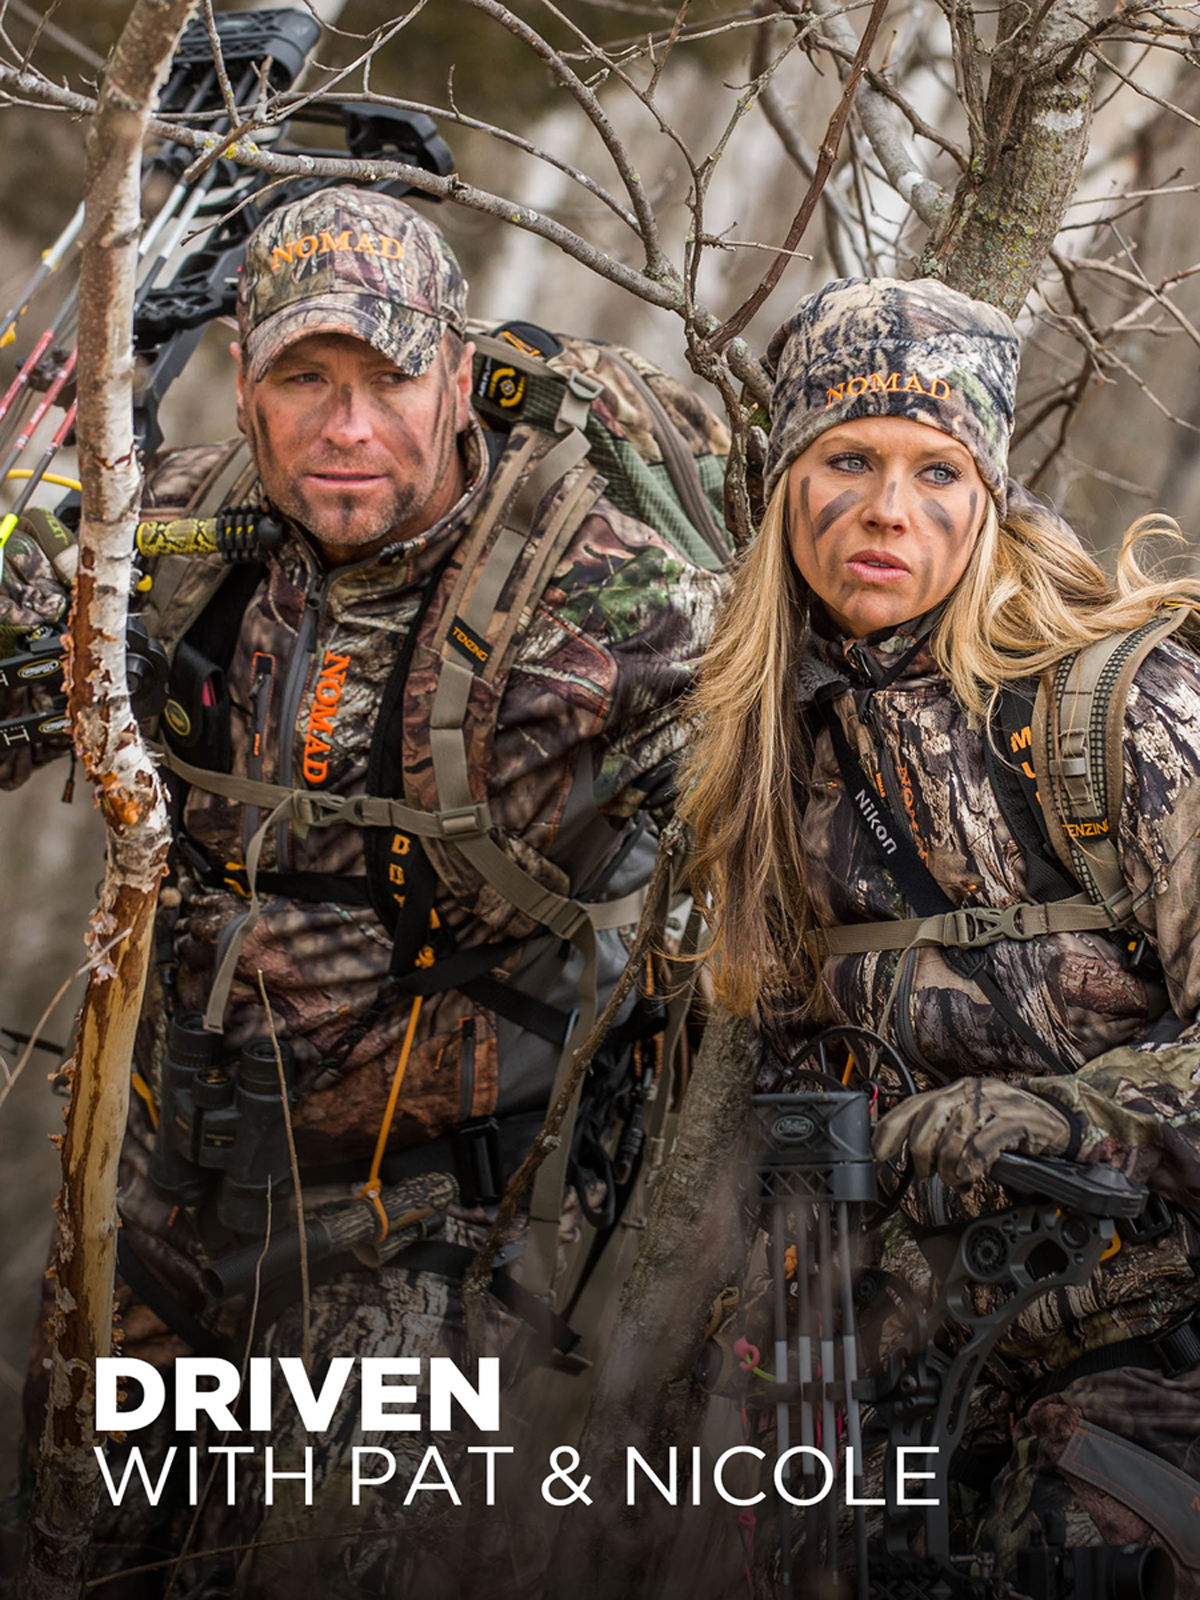 GSM Outdoors Renews Partnership with Driven with Pat & Nicole